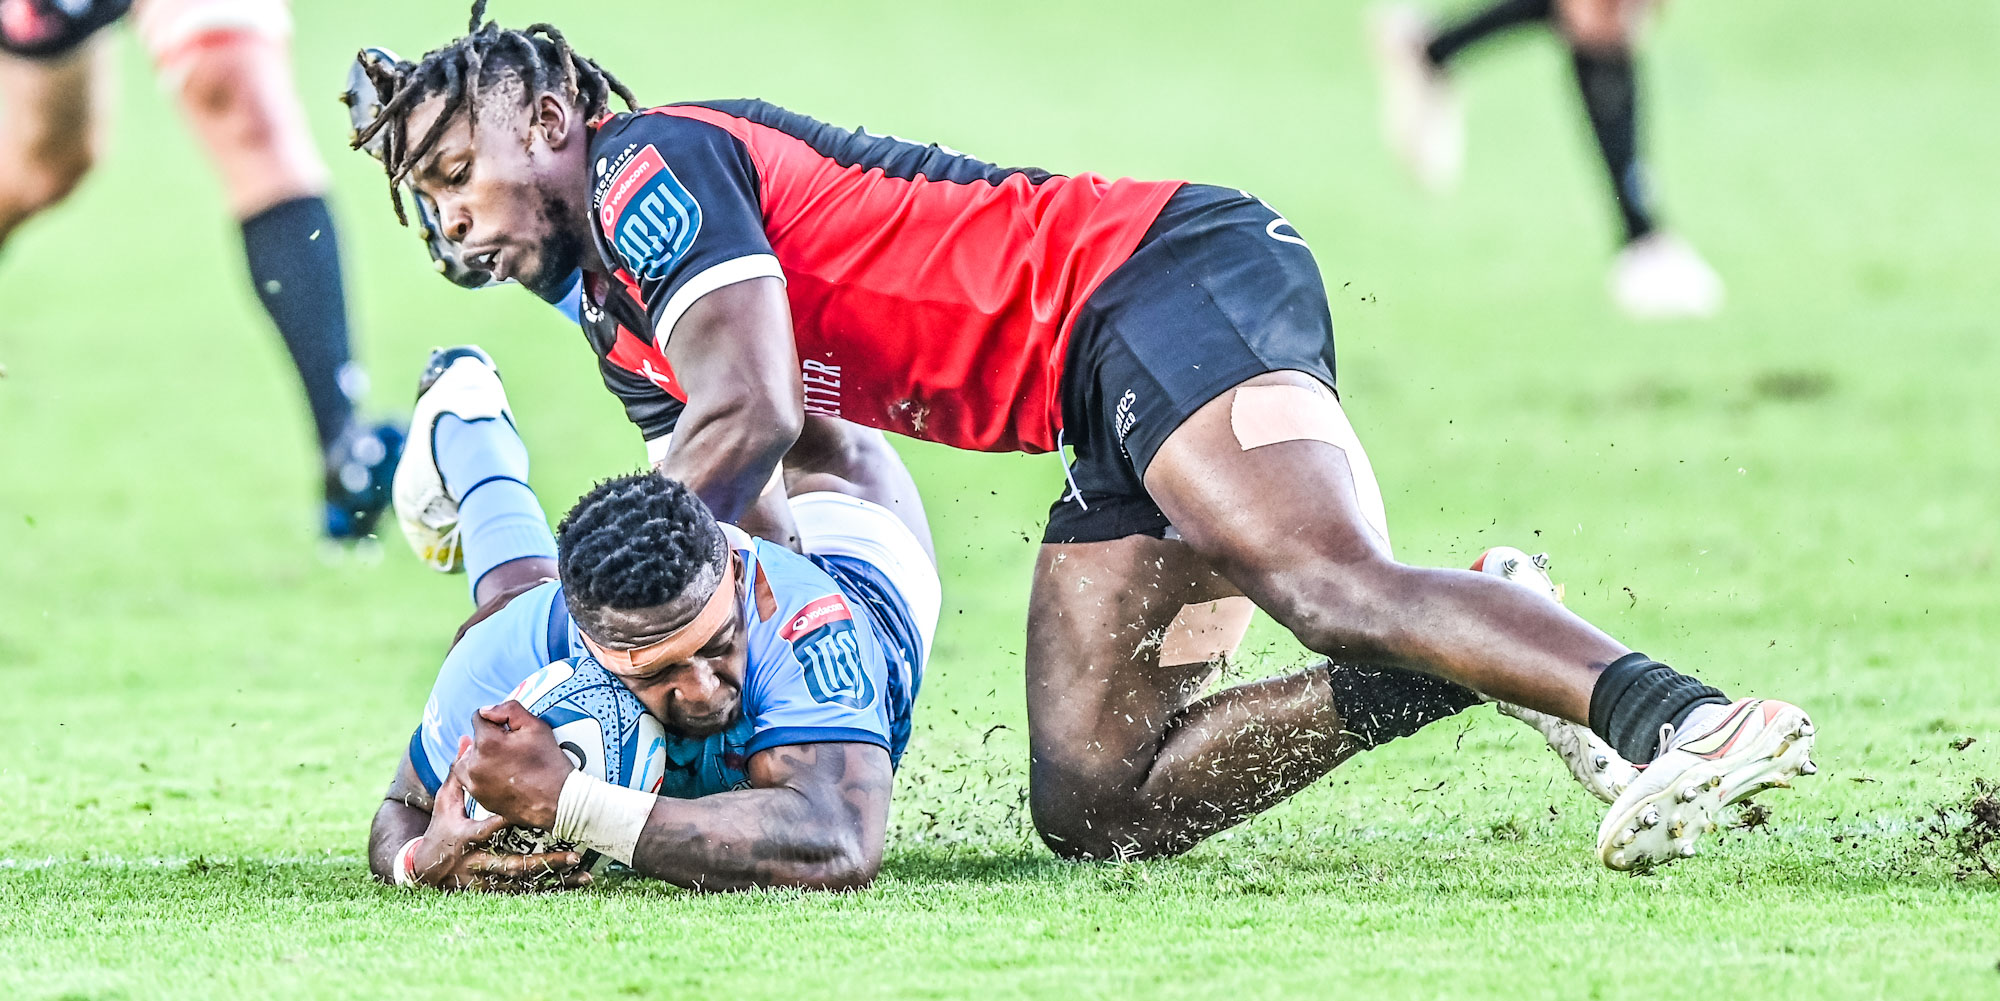 Sbu Nkosi goes over for a try for the Vodacom Bulls against the Emirates Lions.